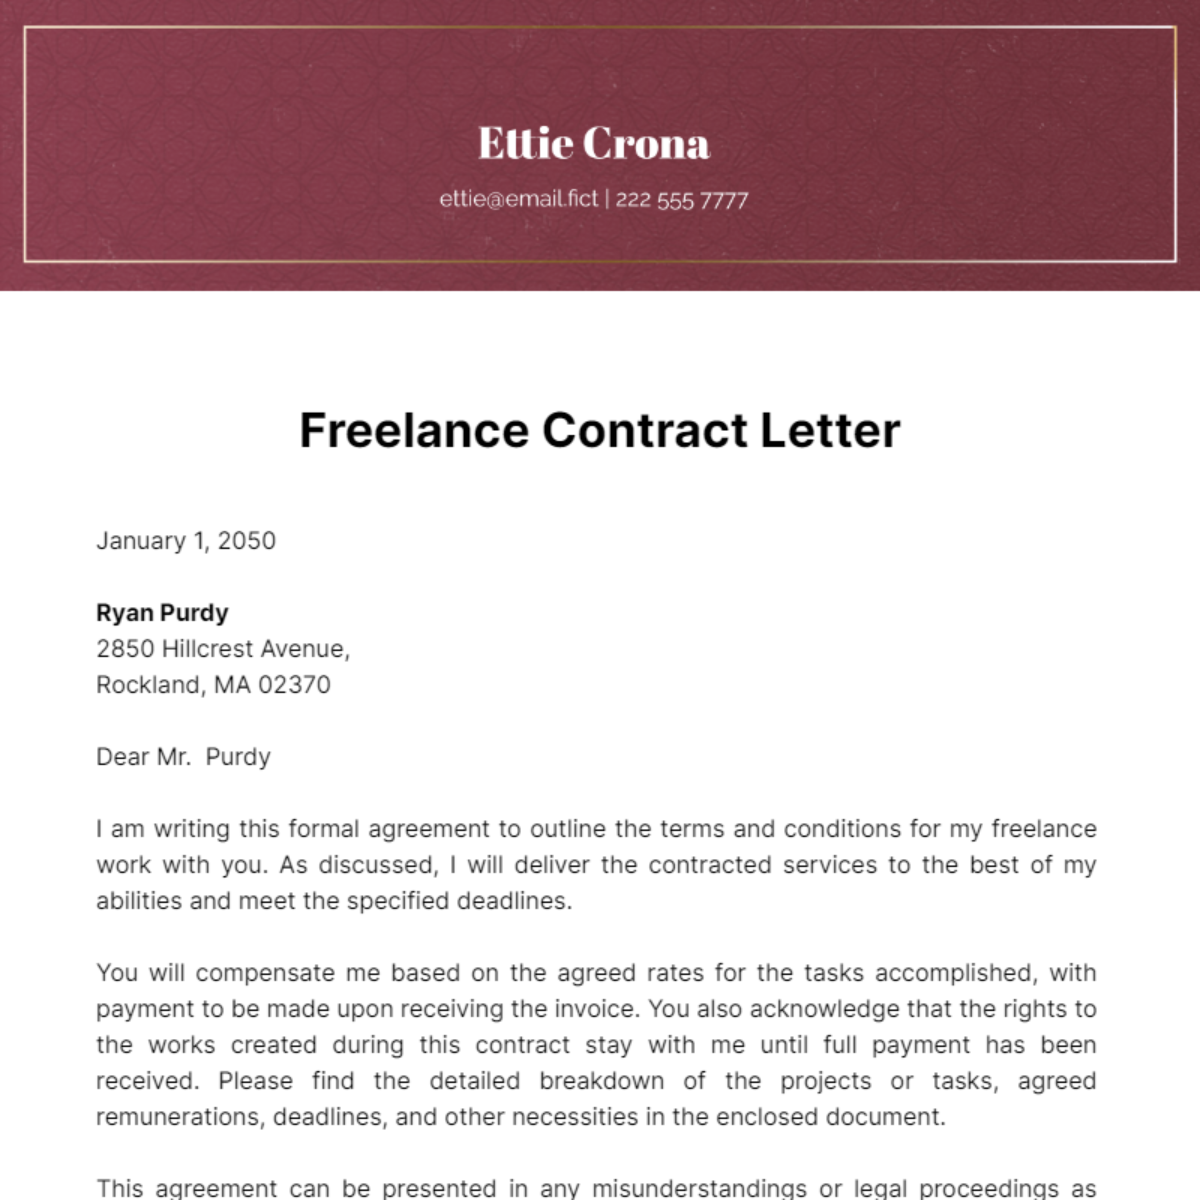 Freelance Contract Letter Template